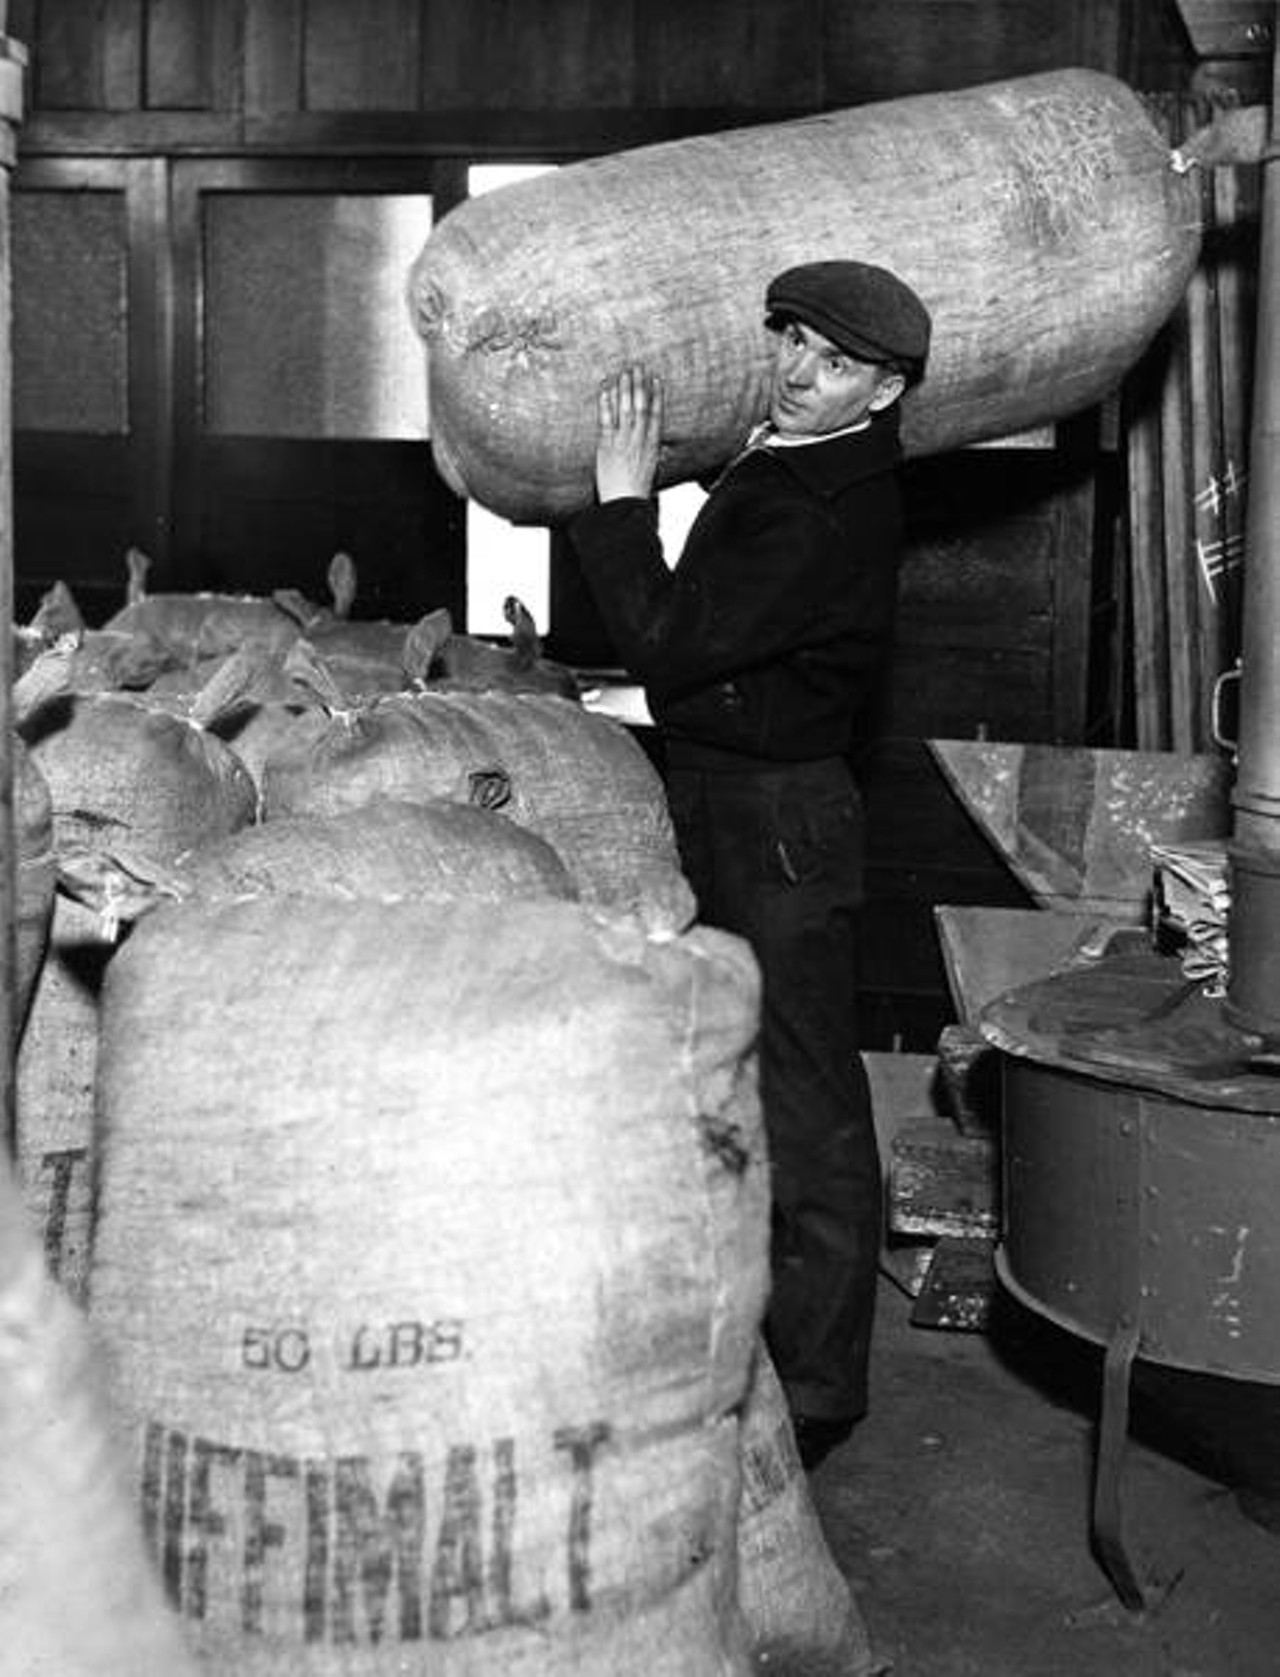  50 Pound Sack of Malted Grain, Pilsener Brewing Company, West 65th and Clark, 1933